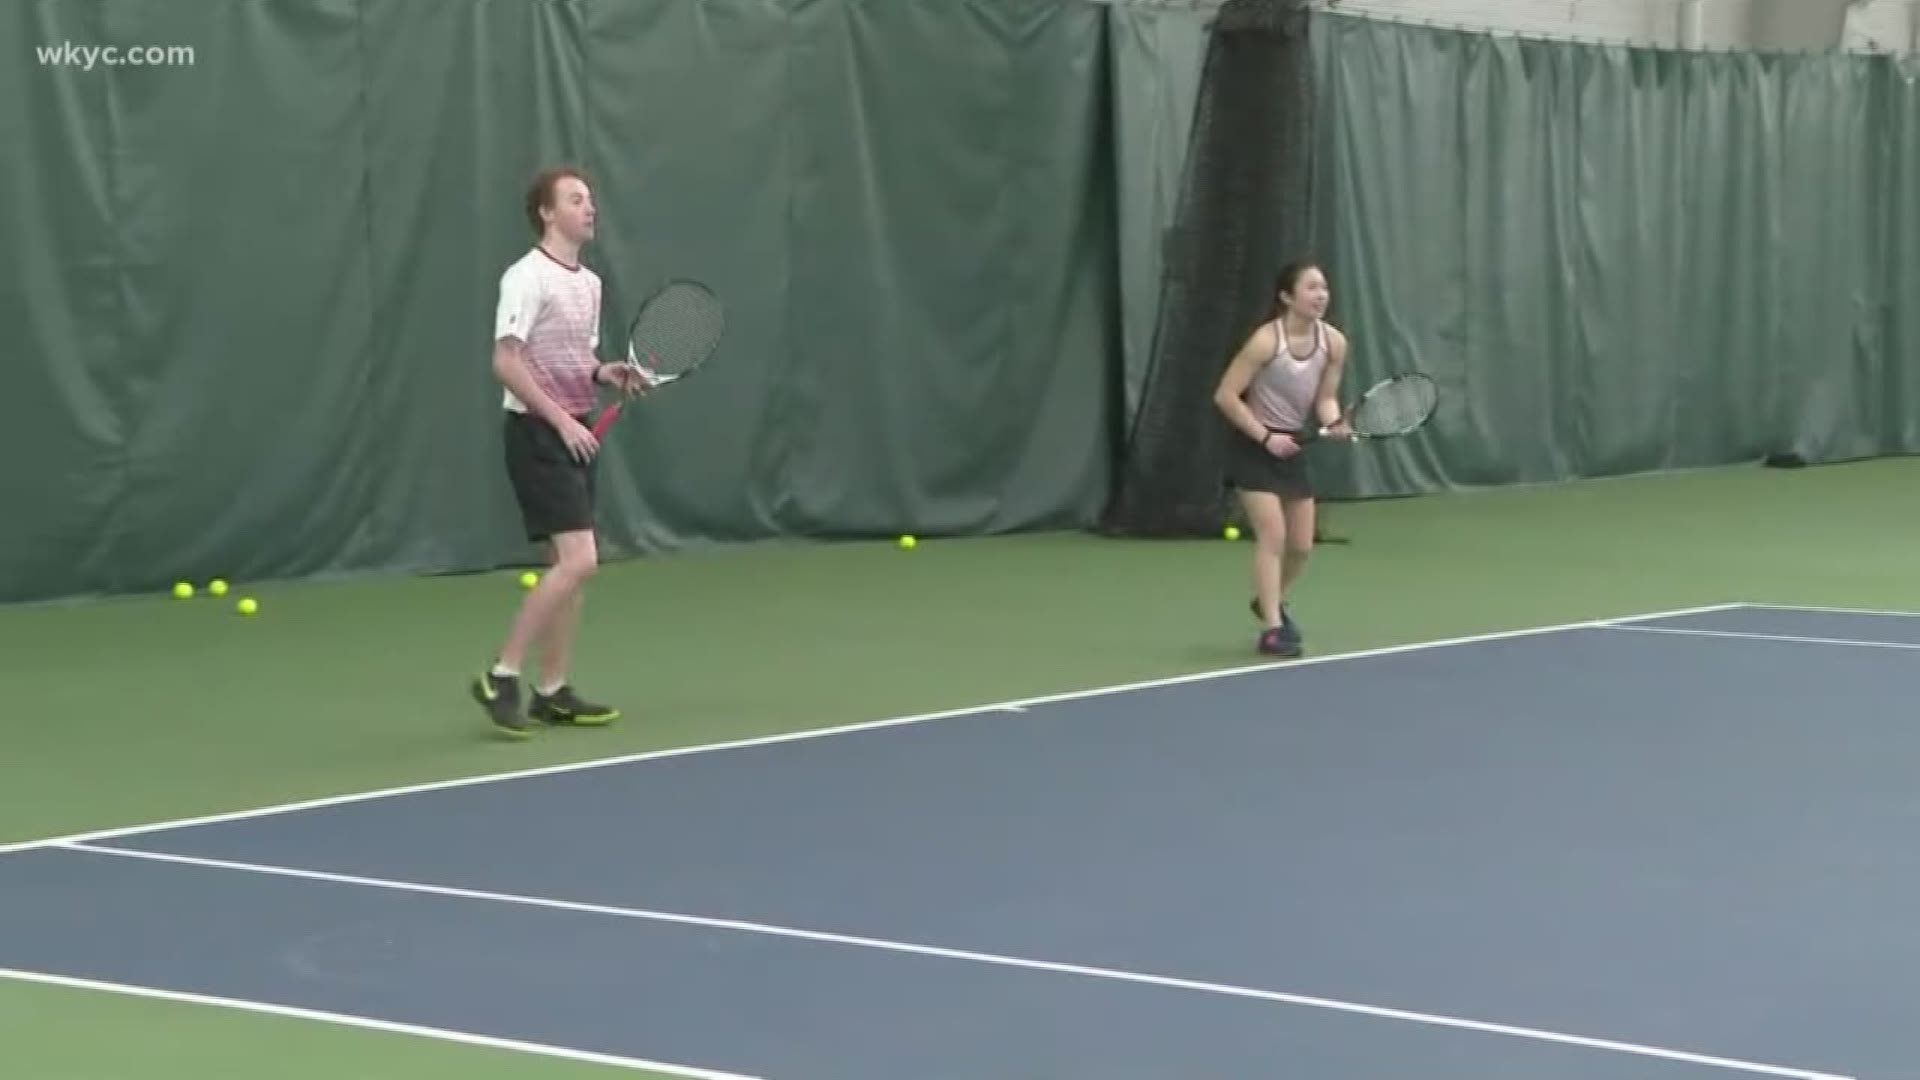 March 21, 2019: Here's an inside look at the LaTuchie Tennis Center in Munroe Falls.